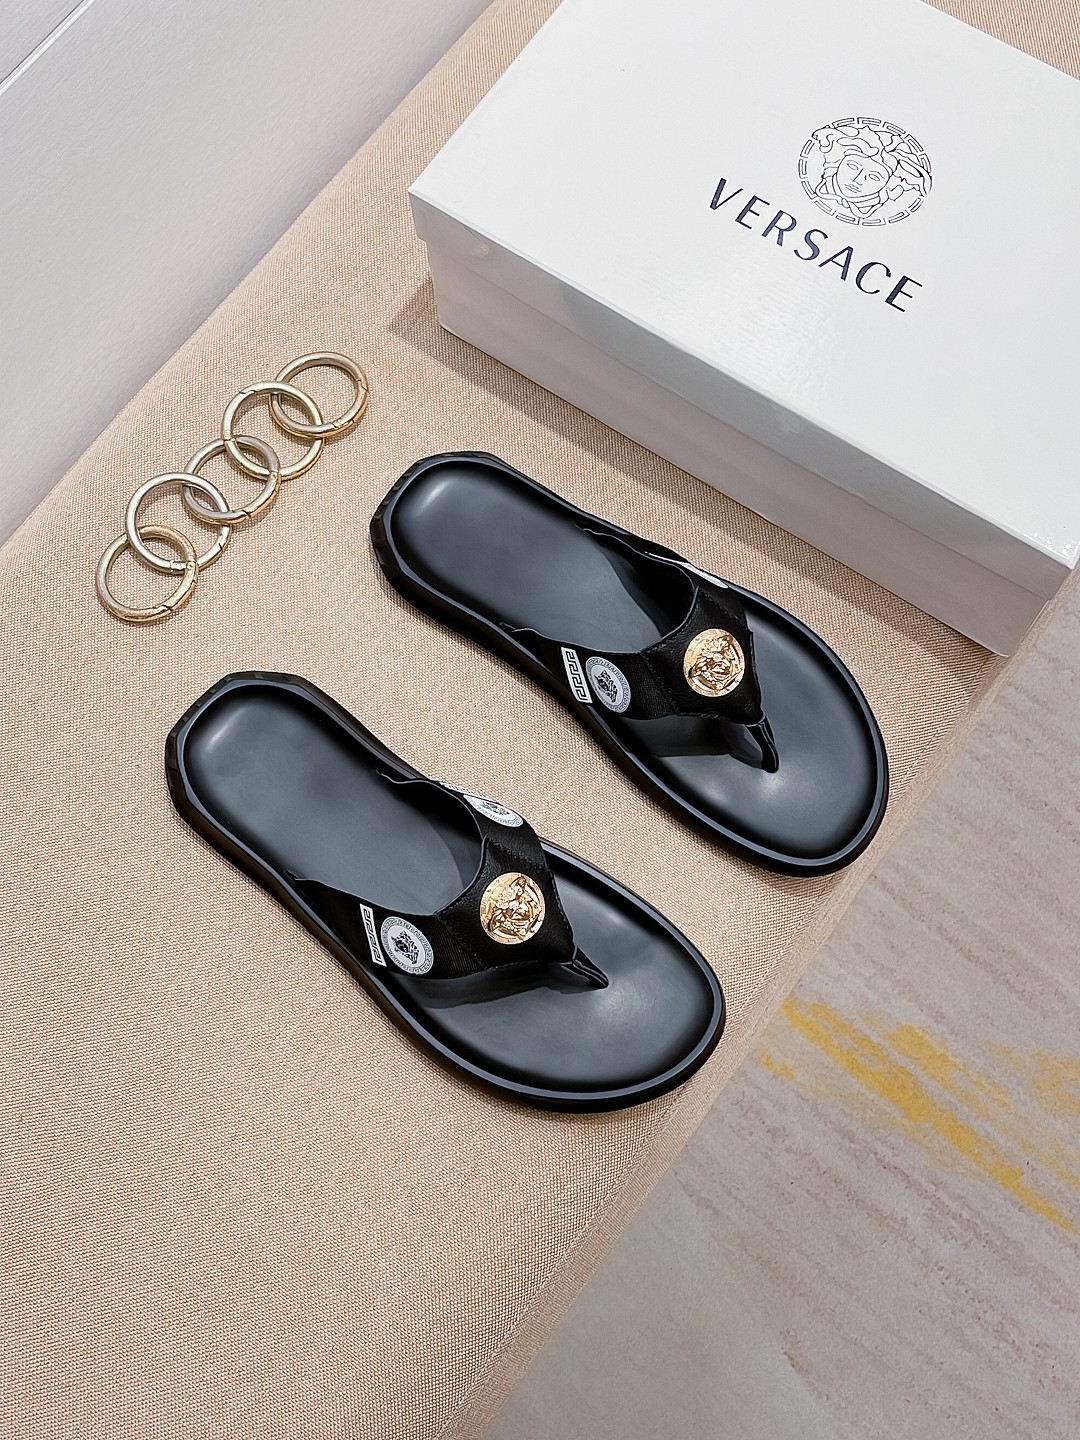 Versace Shoes Slippers Cowhide Rubber Fashion Casual